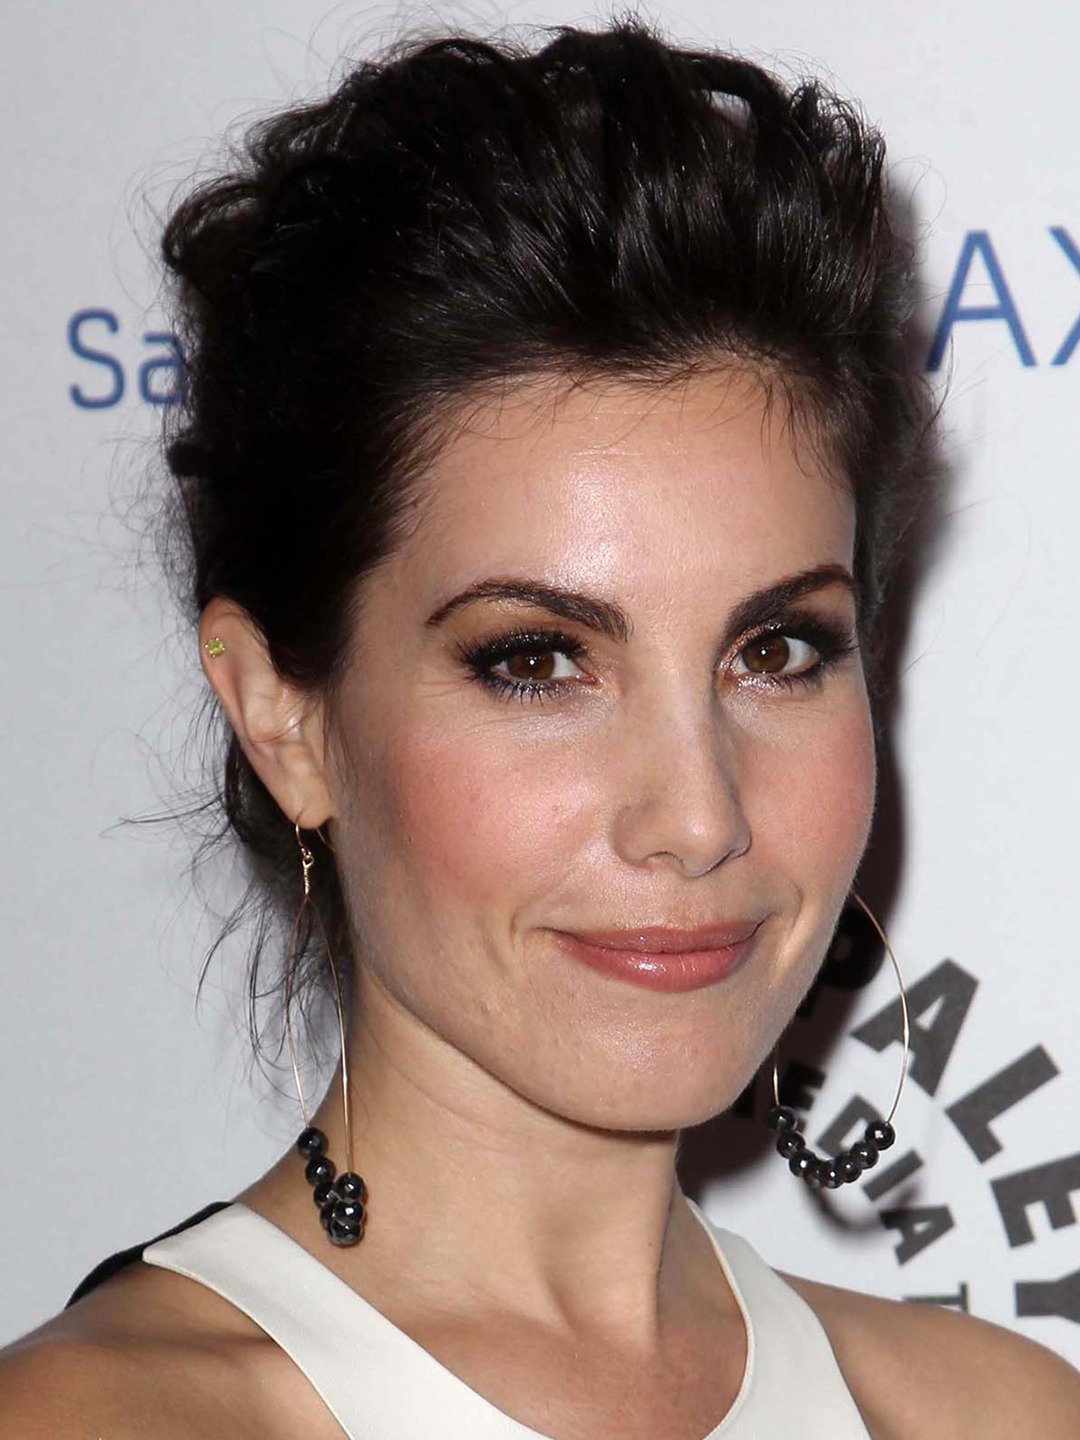 How tall is Carly Pope?